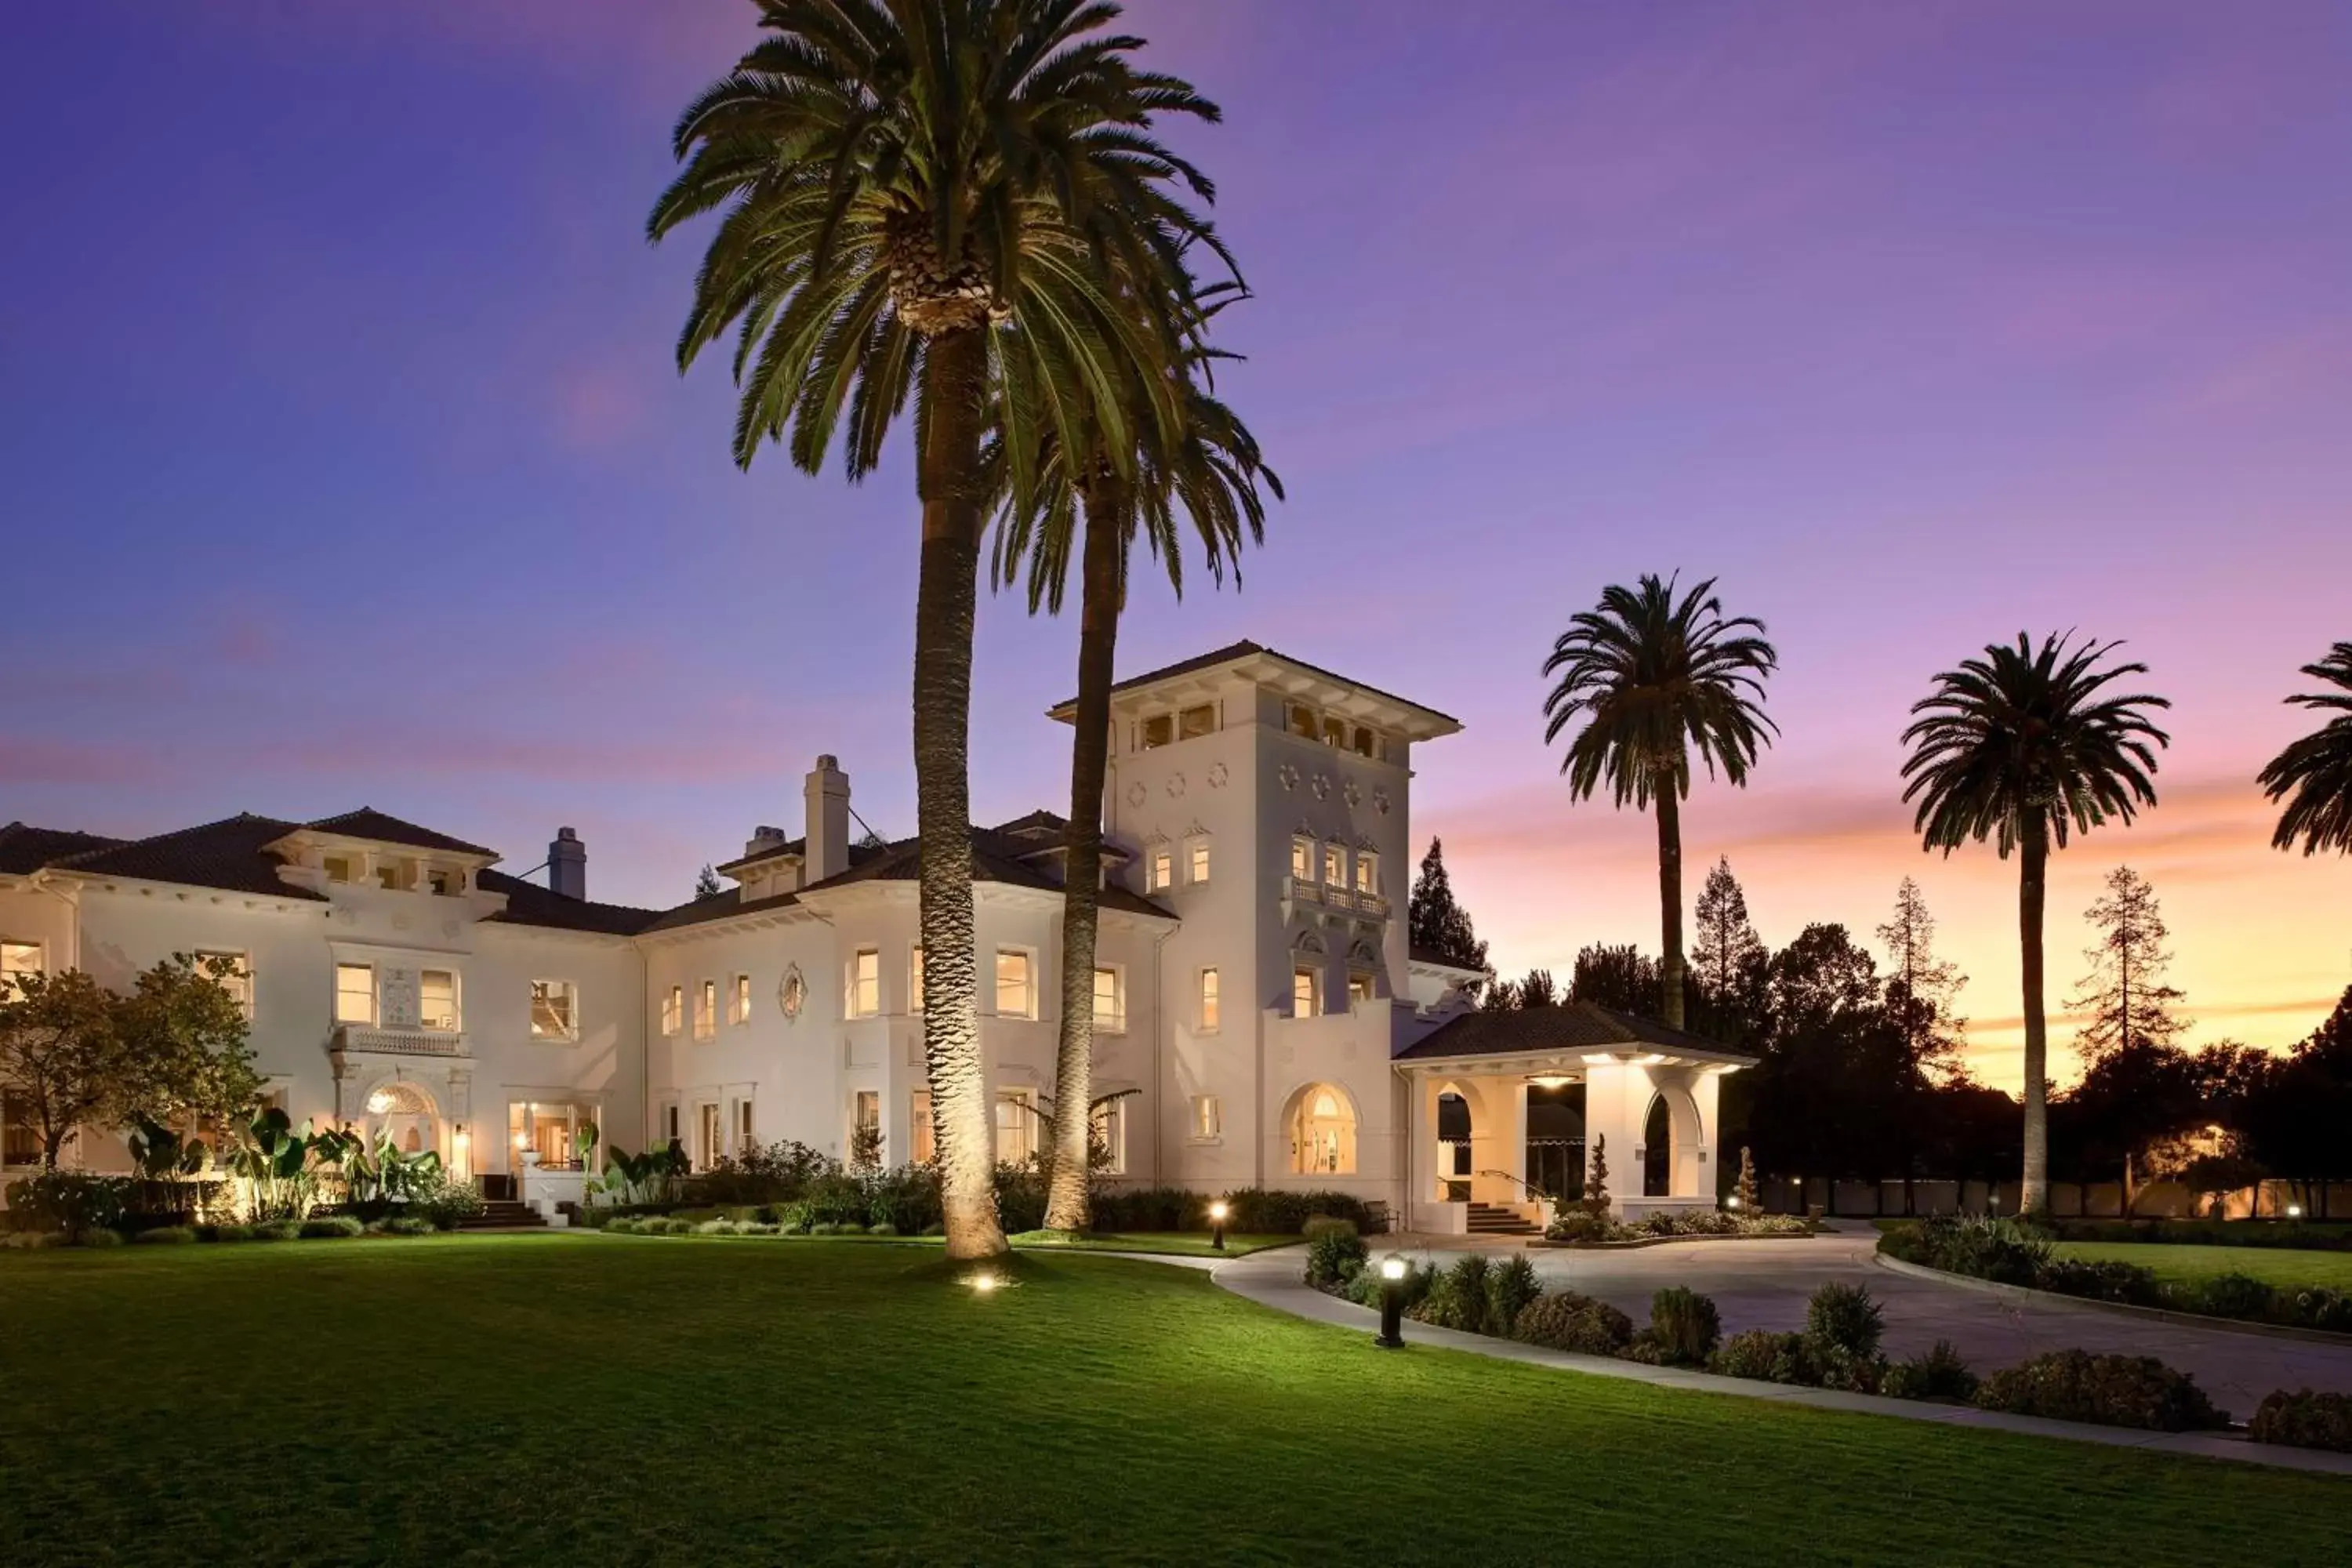 Property Building in Hayes Mansion San Jose, Curio Collection by Hilton